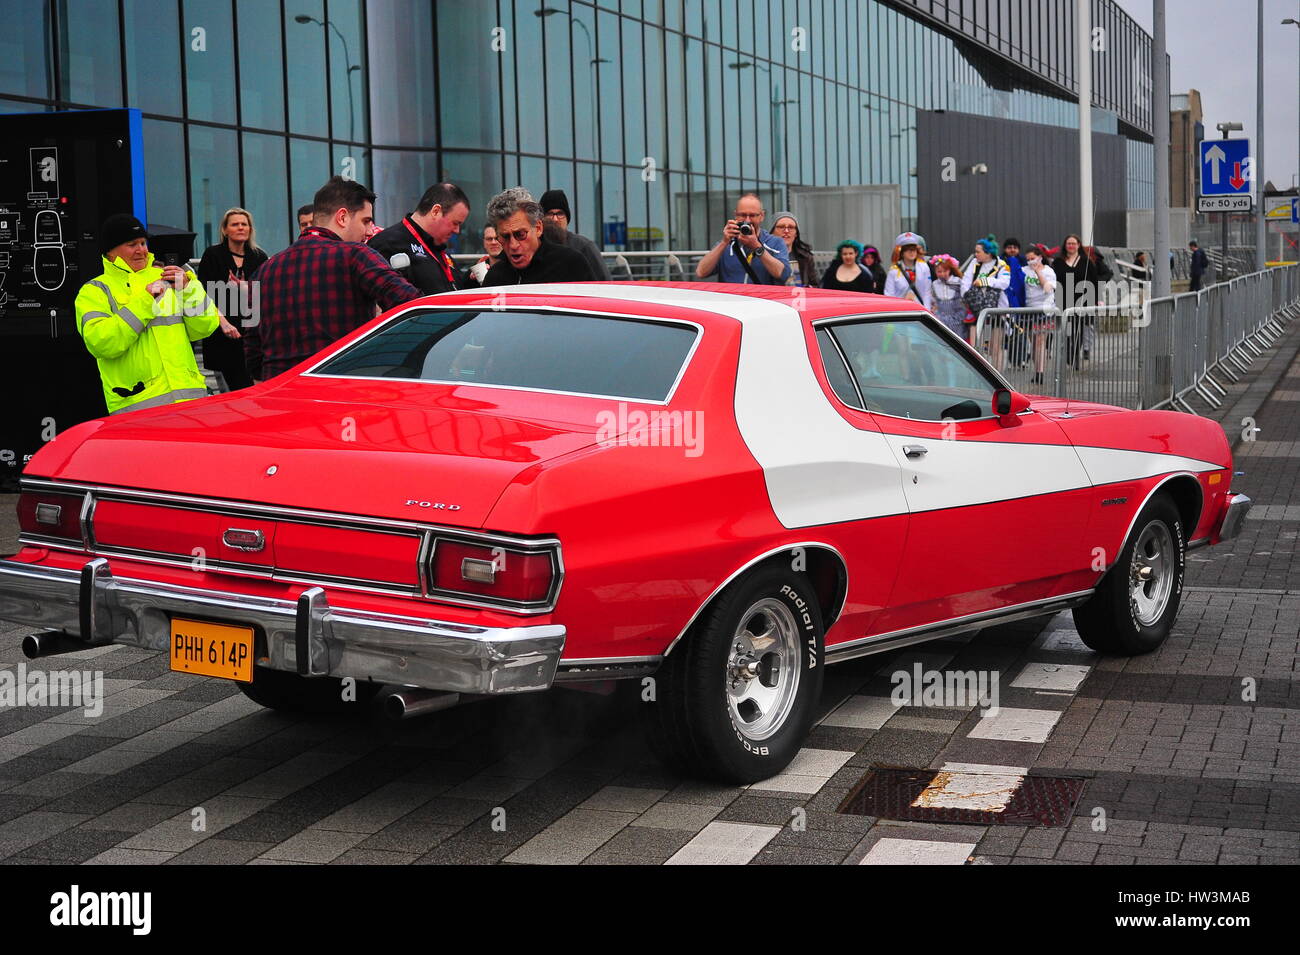 File:1976 Ford Torino Starsky and Hutch limited edition.jpg